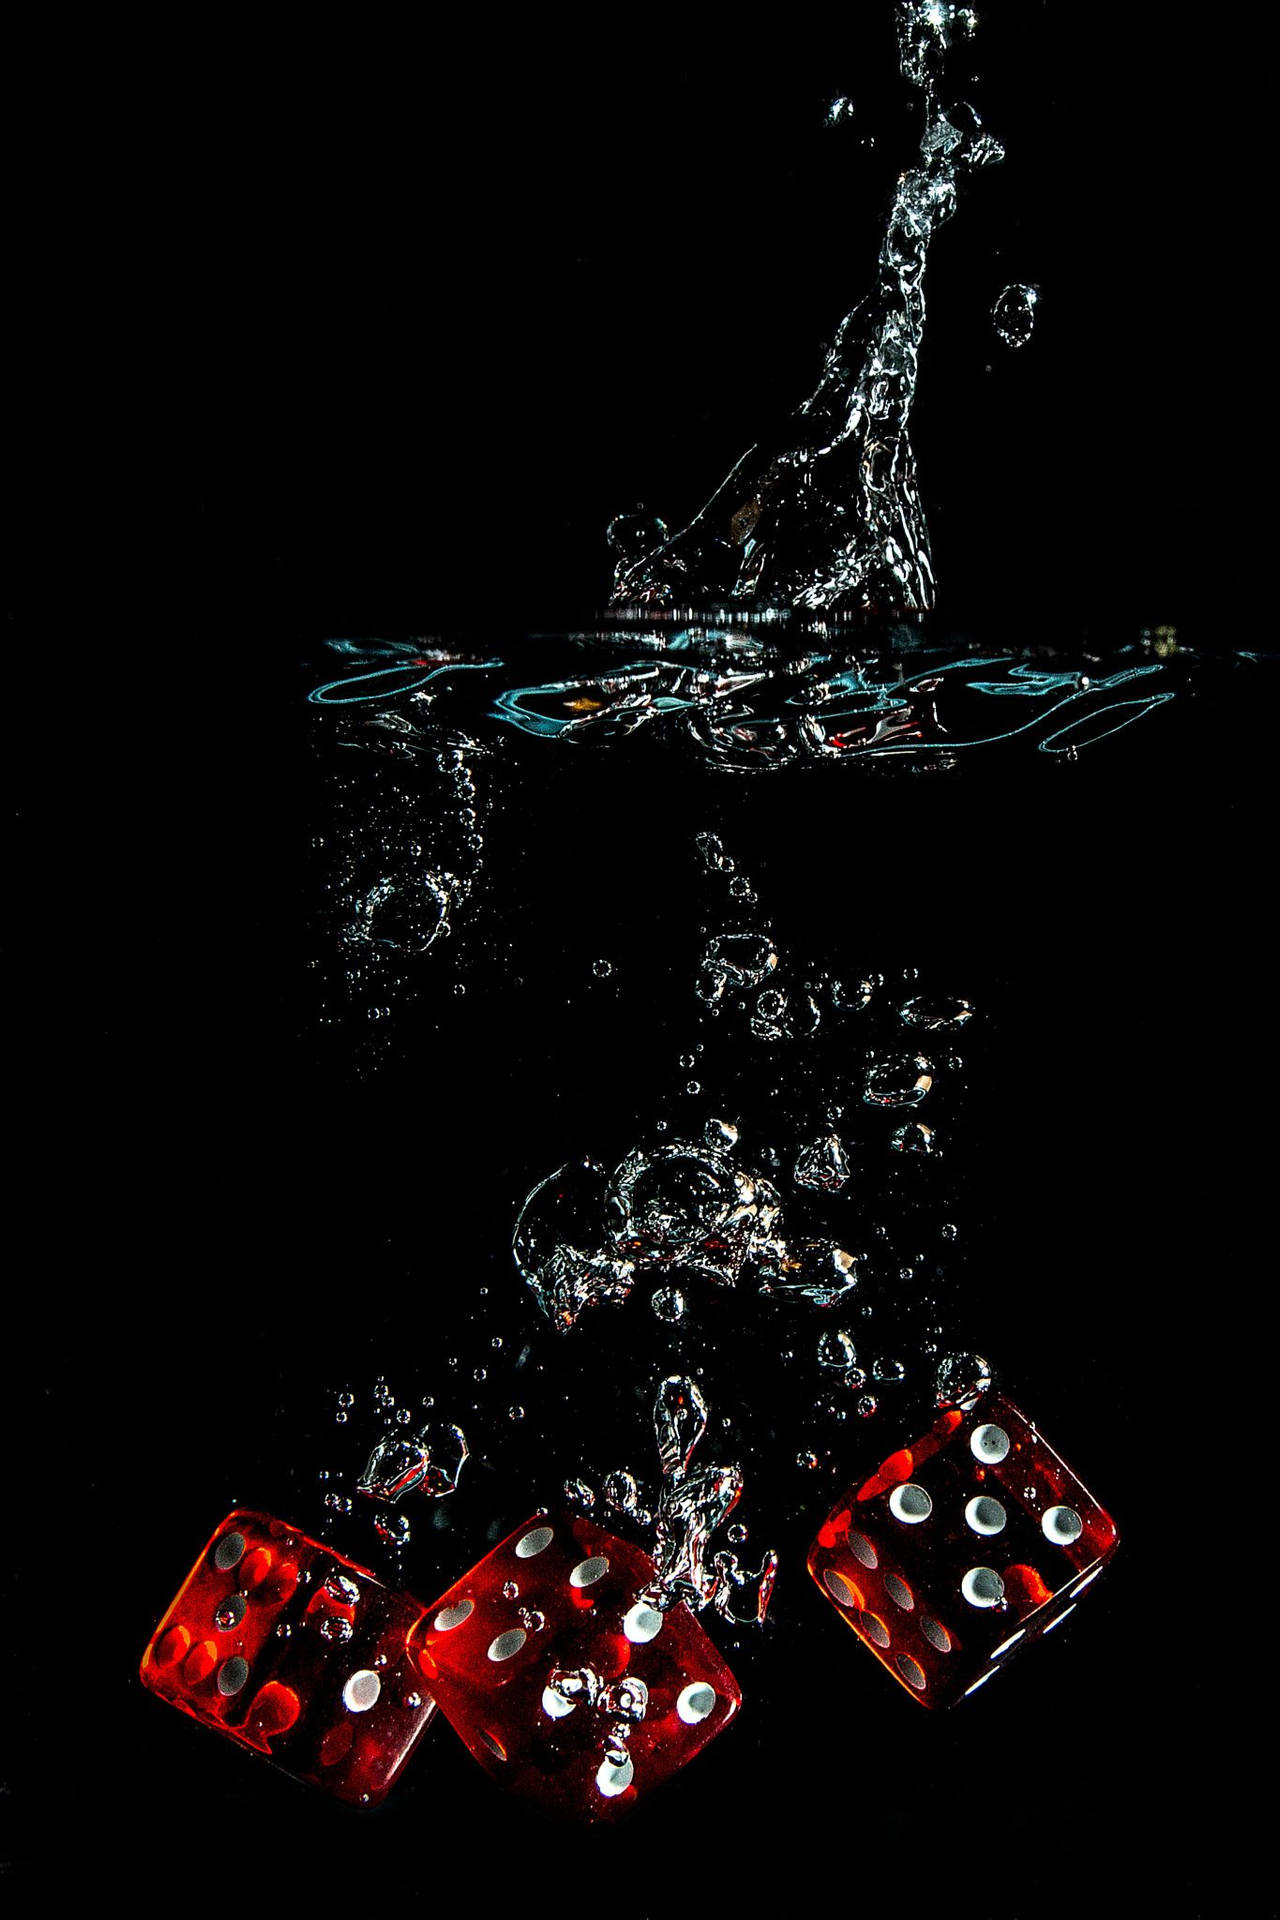 Red Crystal Dice Wallpaper